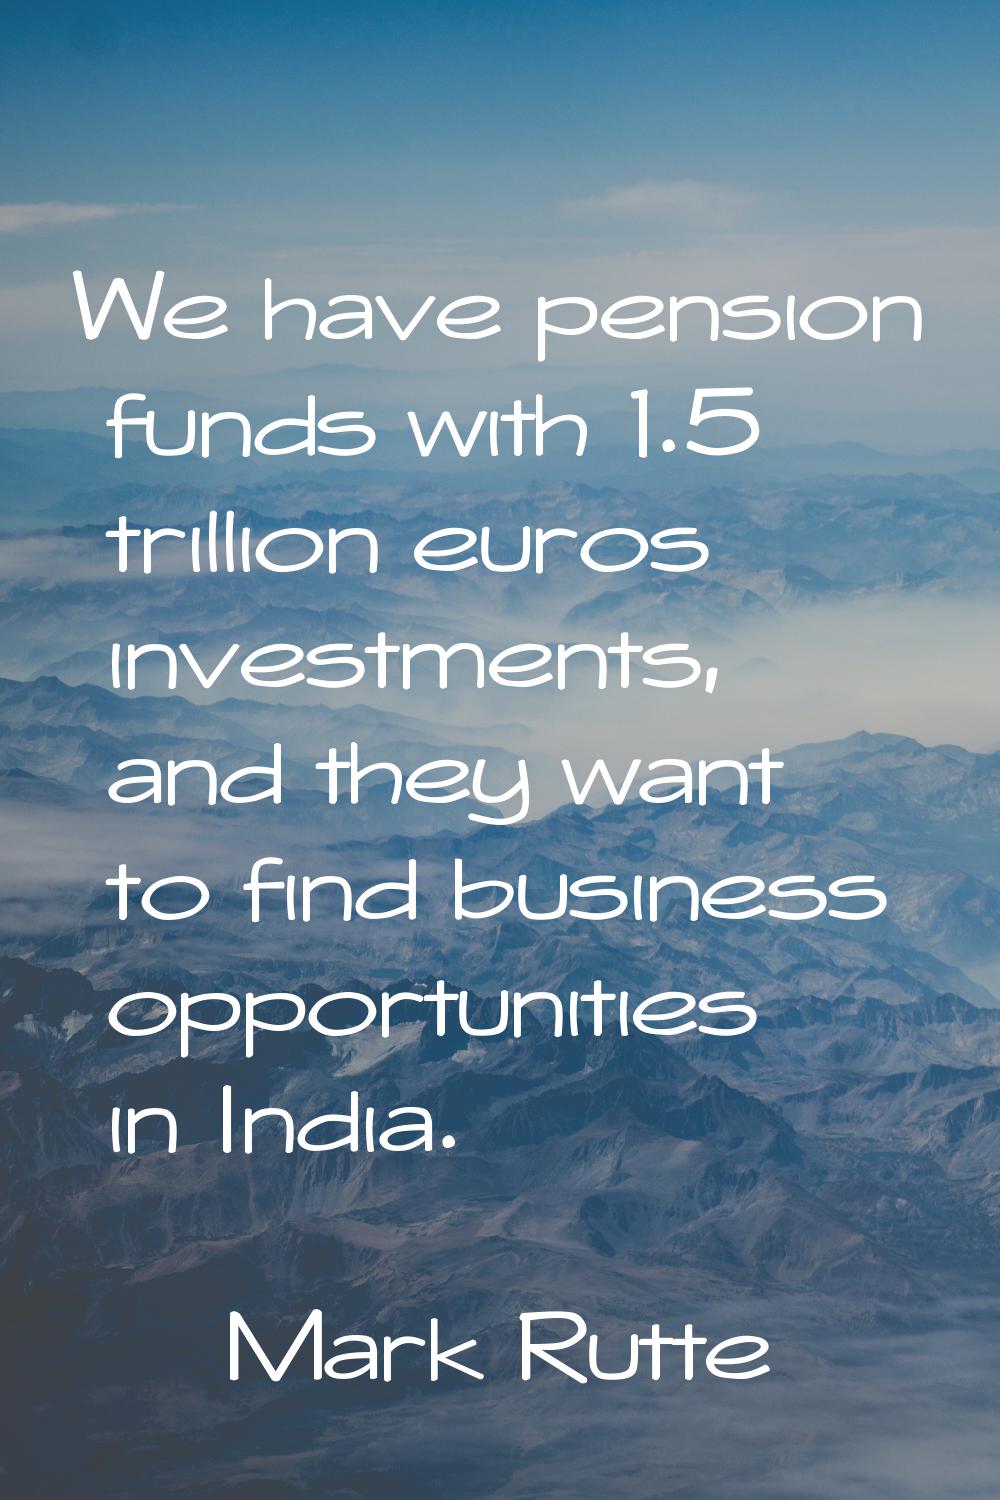 We have pension funds with 1.5 trillion euros investments, and they want to find business opportuni